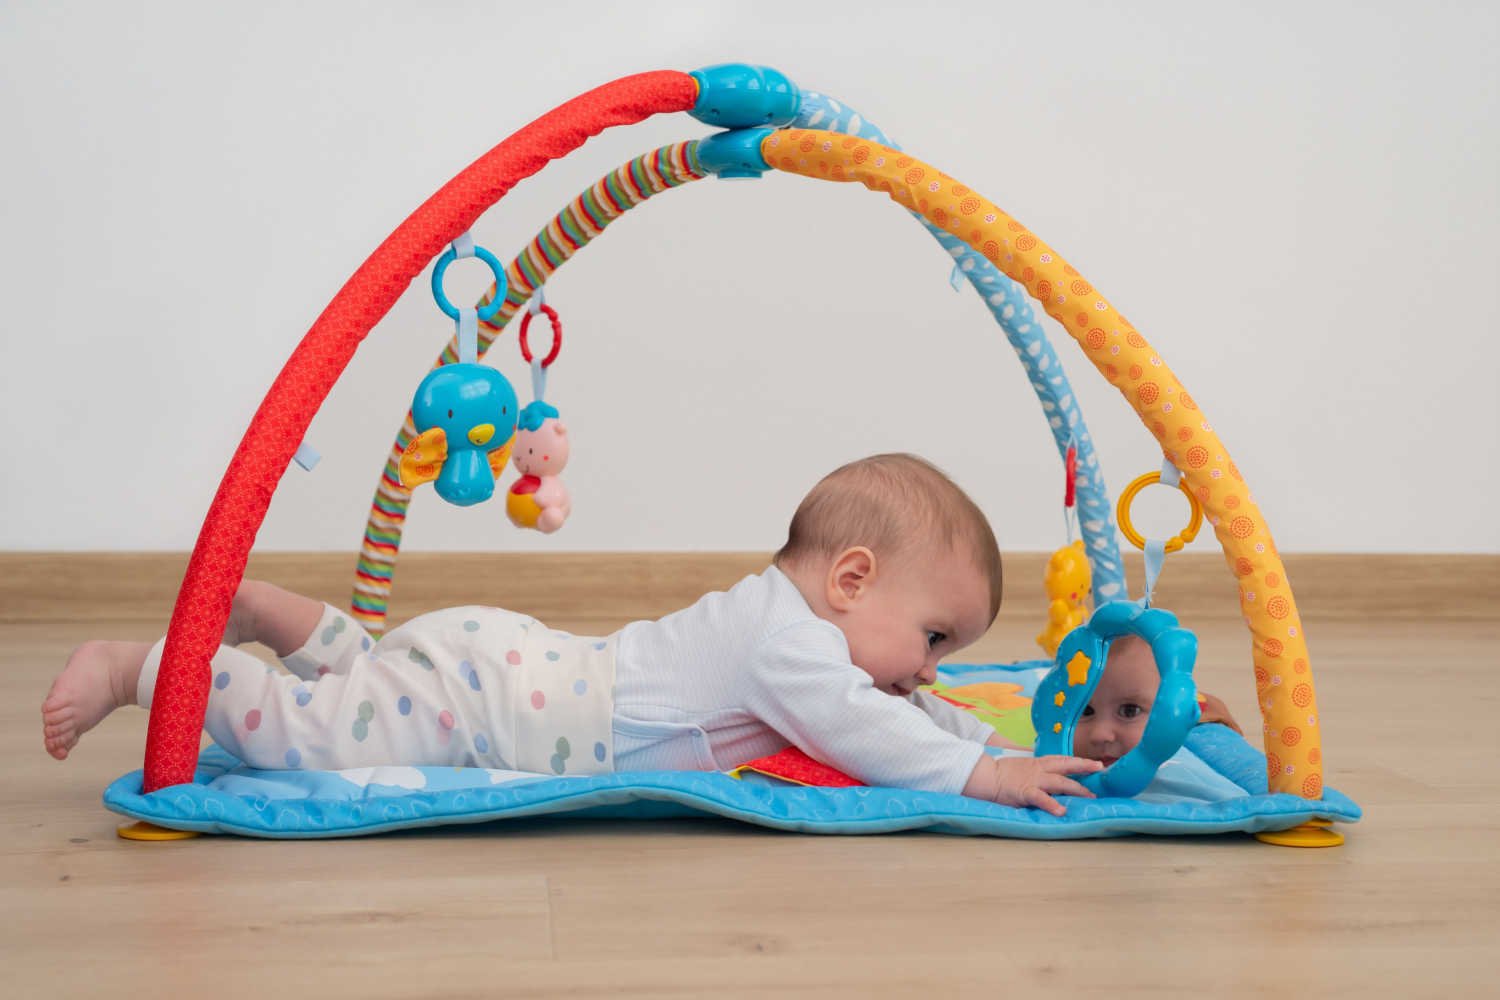 Benefits of Using Play Gyms For Babies